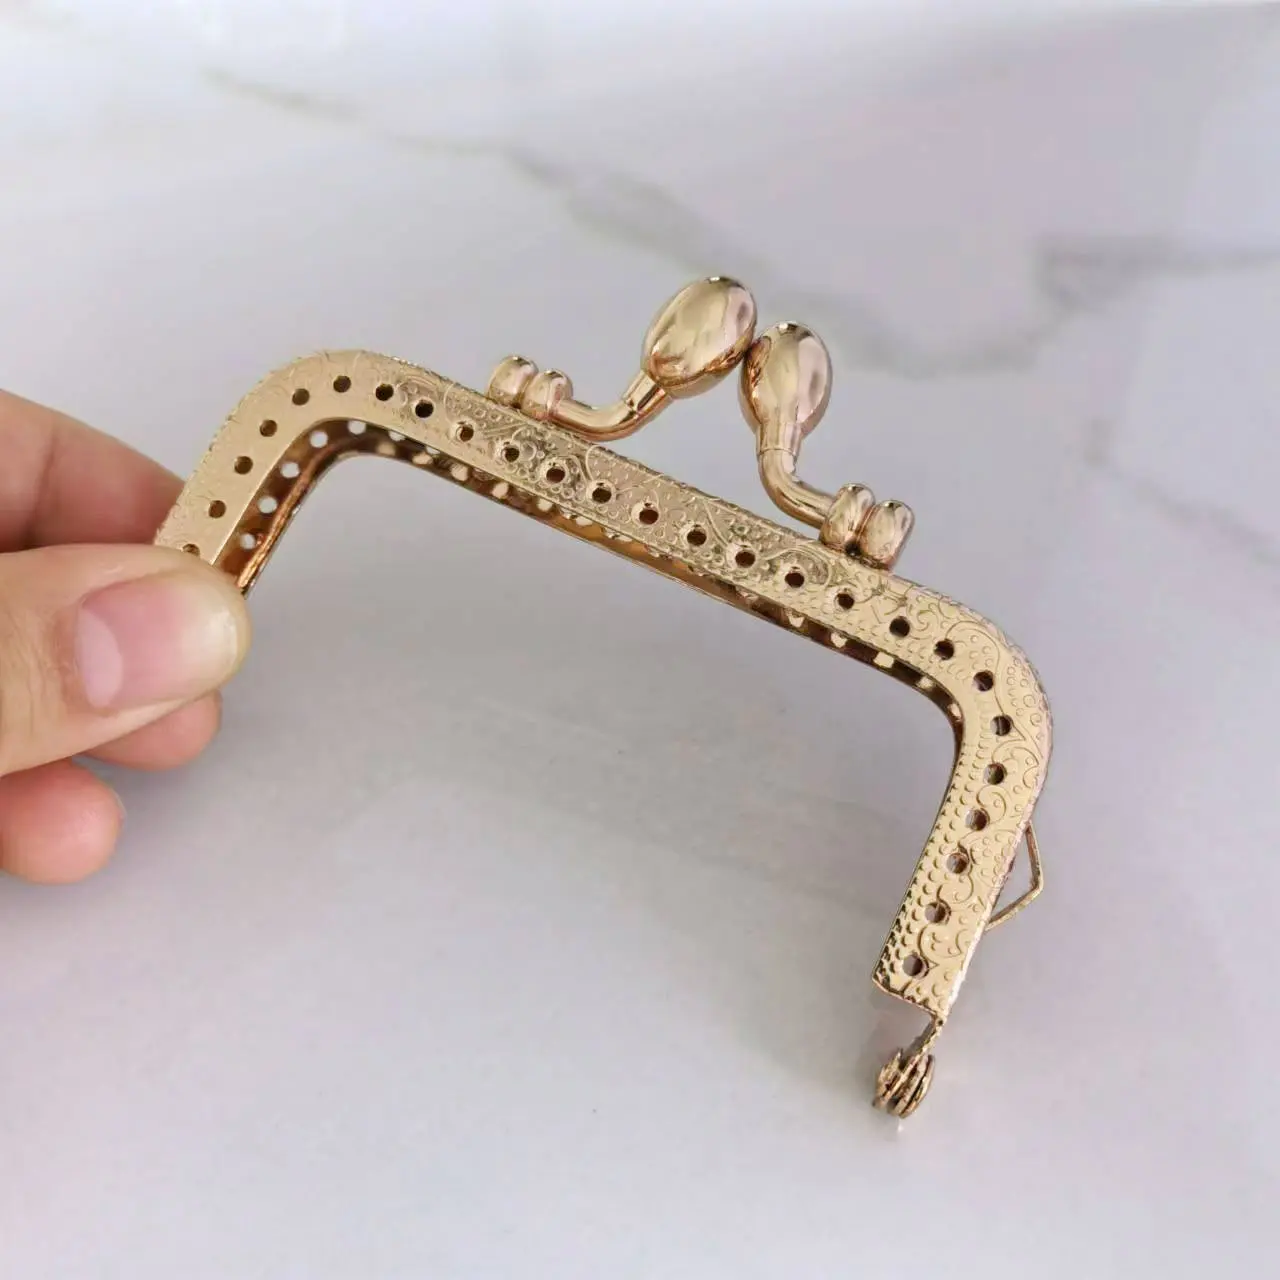 

Square Clutch Buckle Light Gold Flower Bud Head 8cm DIY Purse Frame With Sewing Holes Kiss Clasp Handmade Luggage Accessories